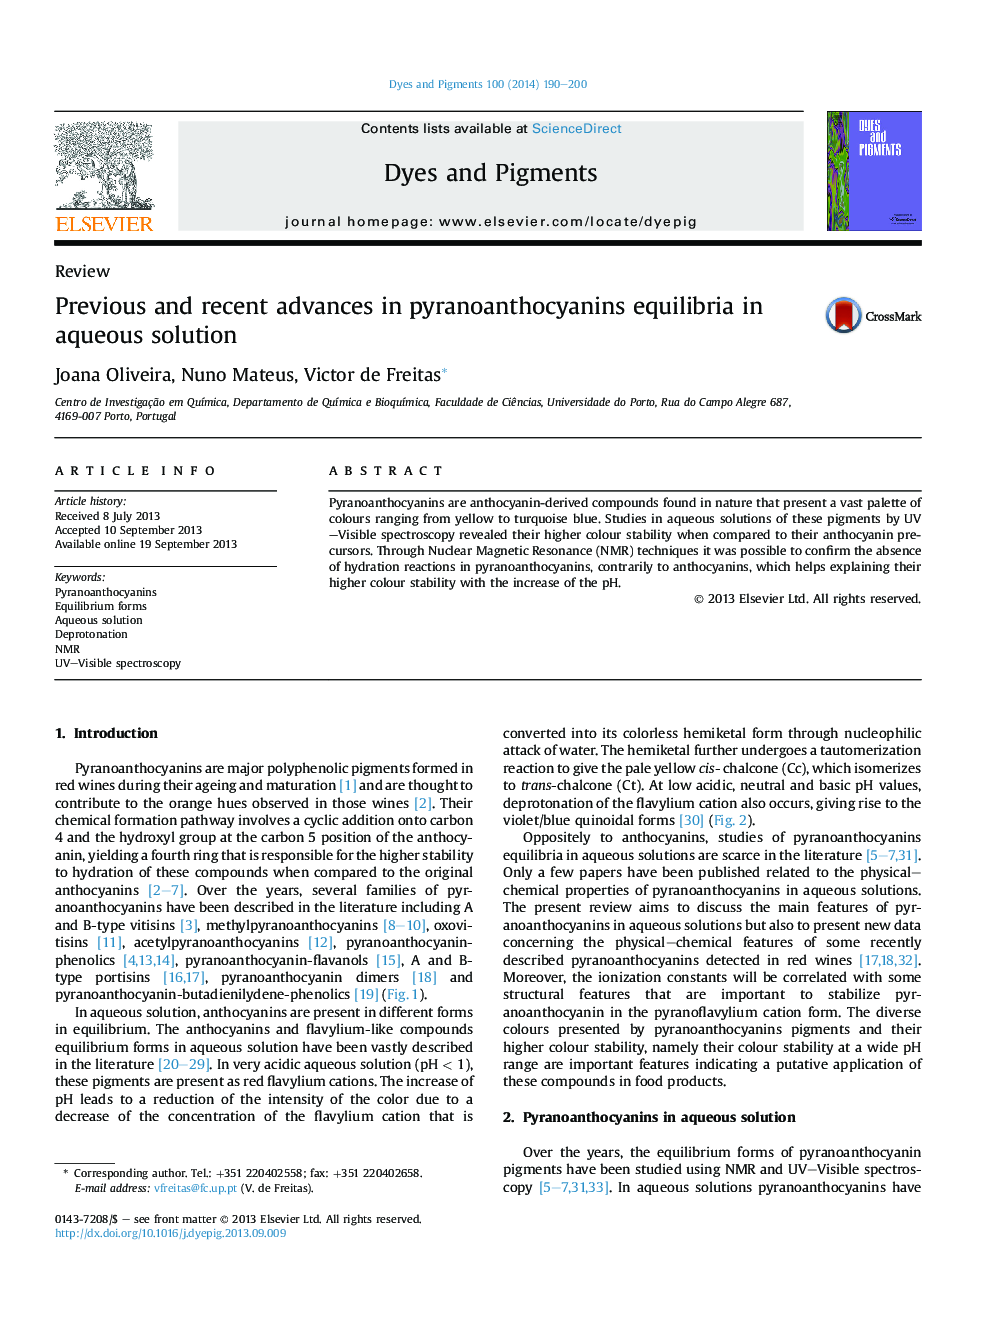 Previous and recent advances in pyranoanthocyanins equilibria in aqueous solution